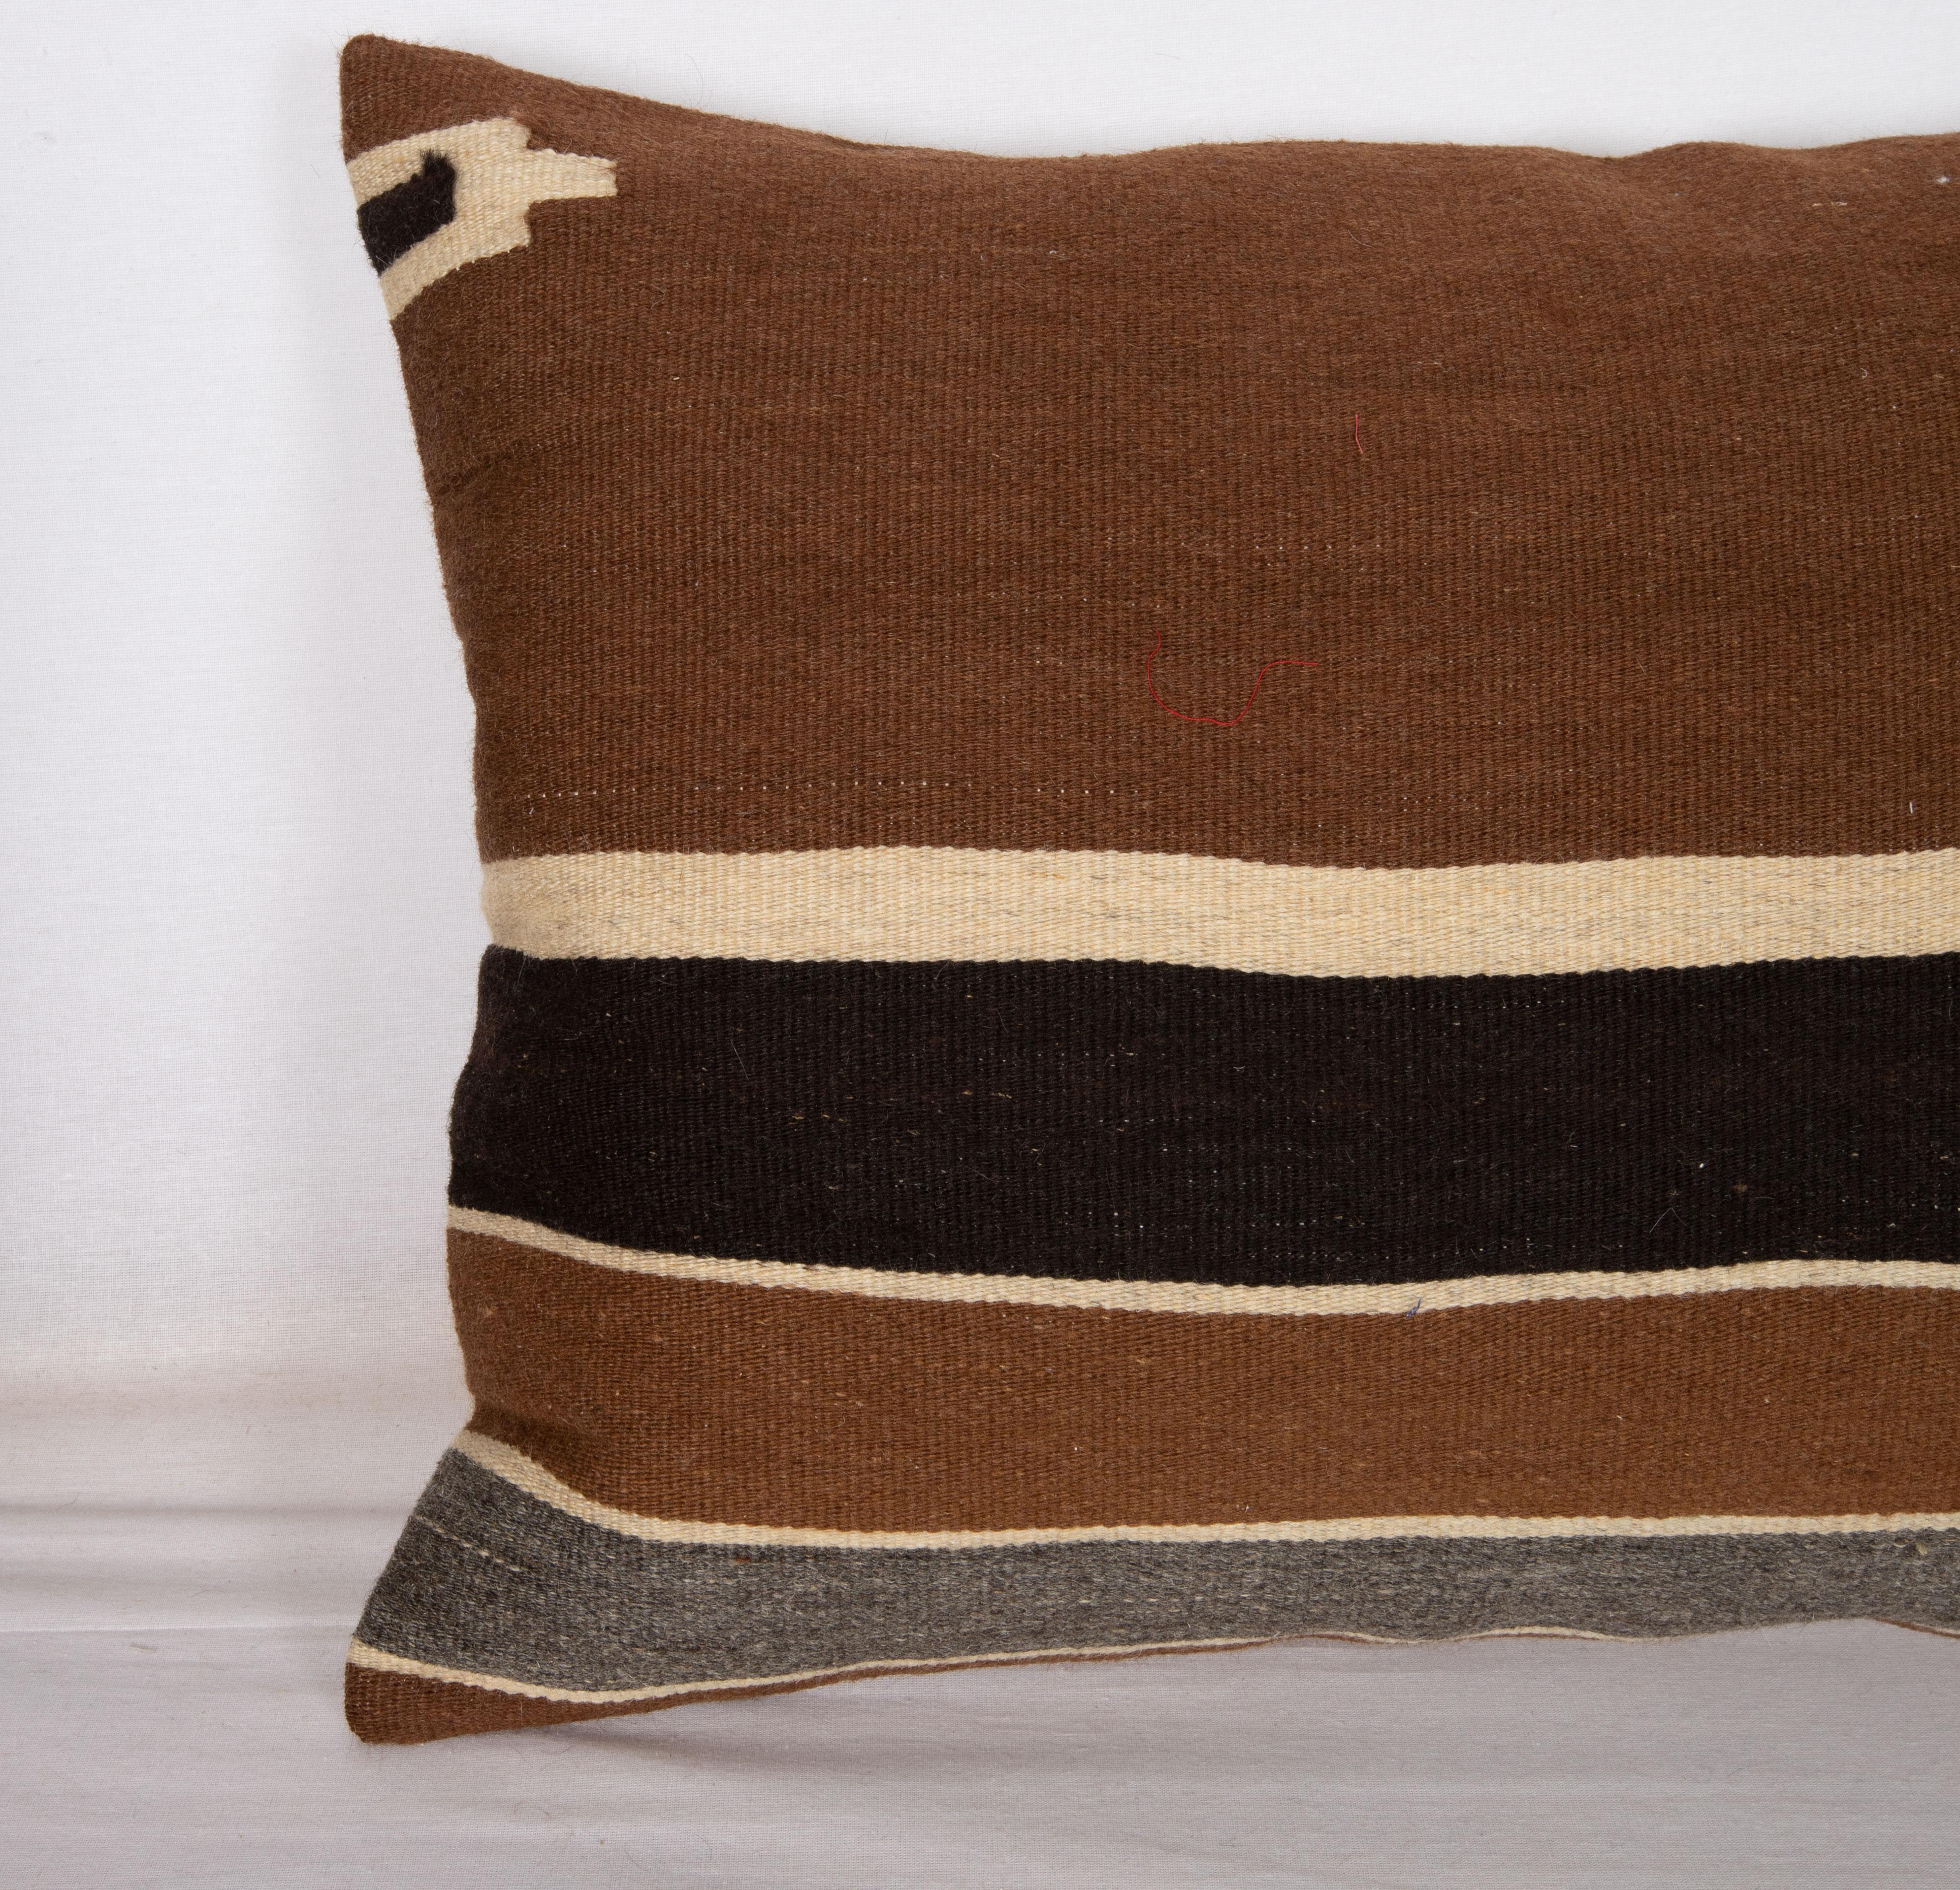 Rustic Angora/ Mohair Siirt Blanket Pillow Cover, 1960s/70s